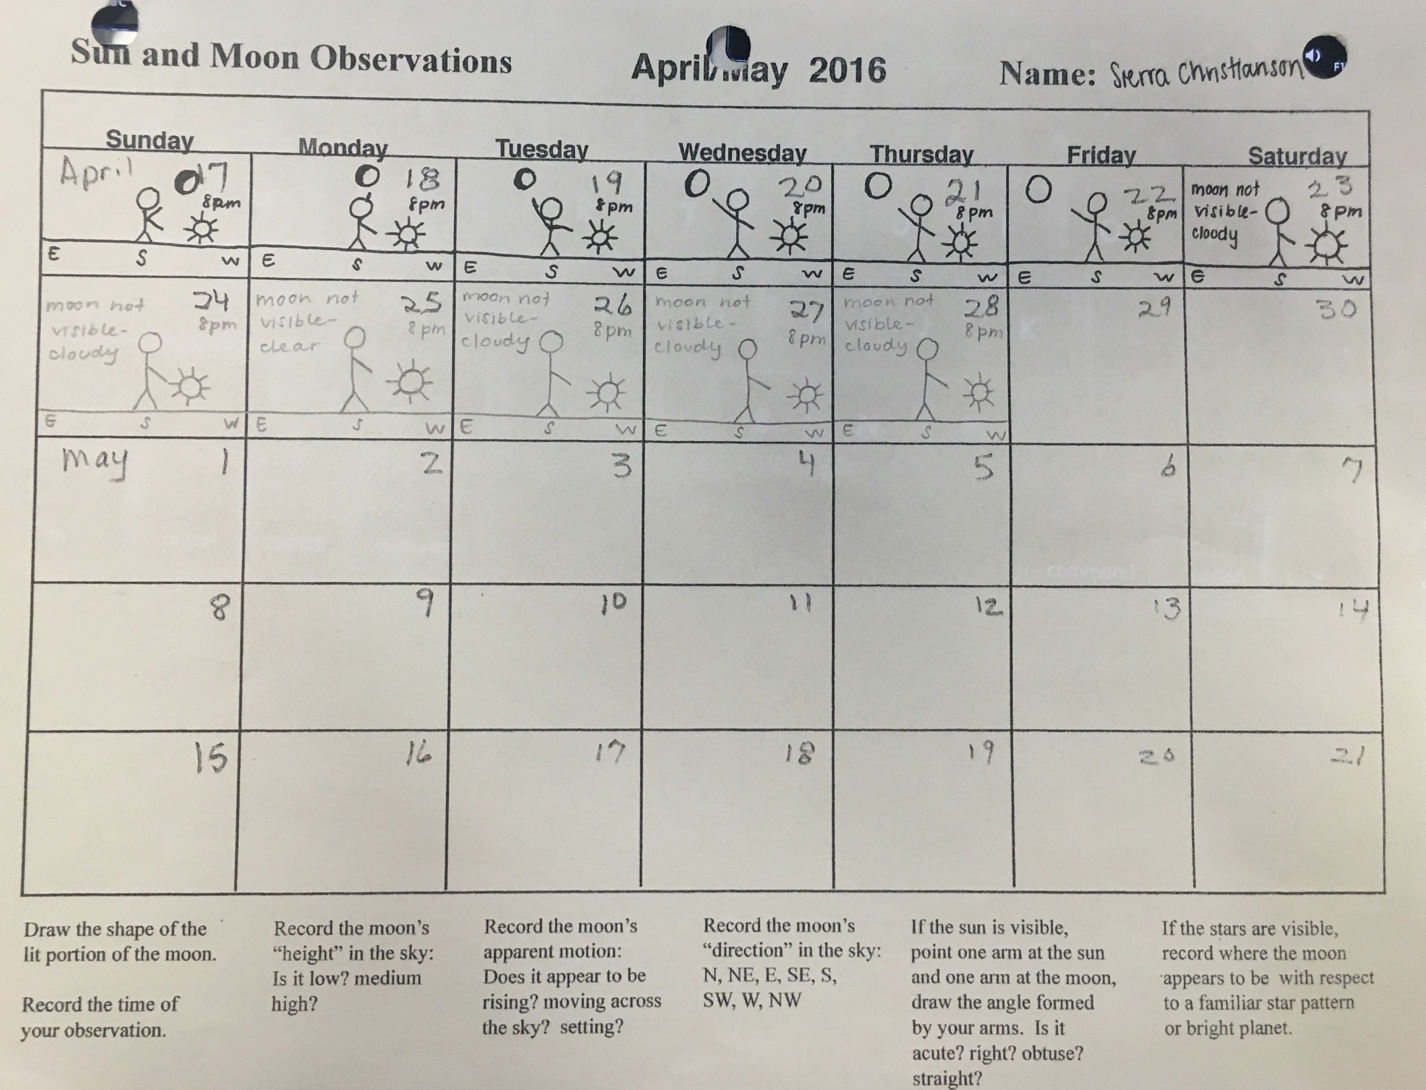 Student’s observations of the Moon, April 17-28, 2016.